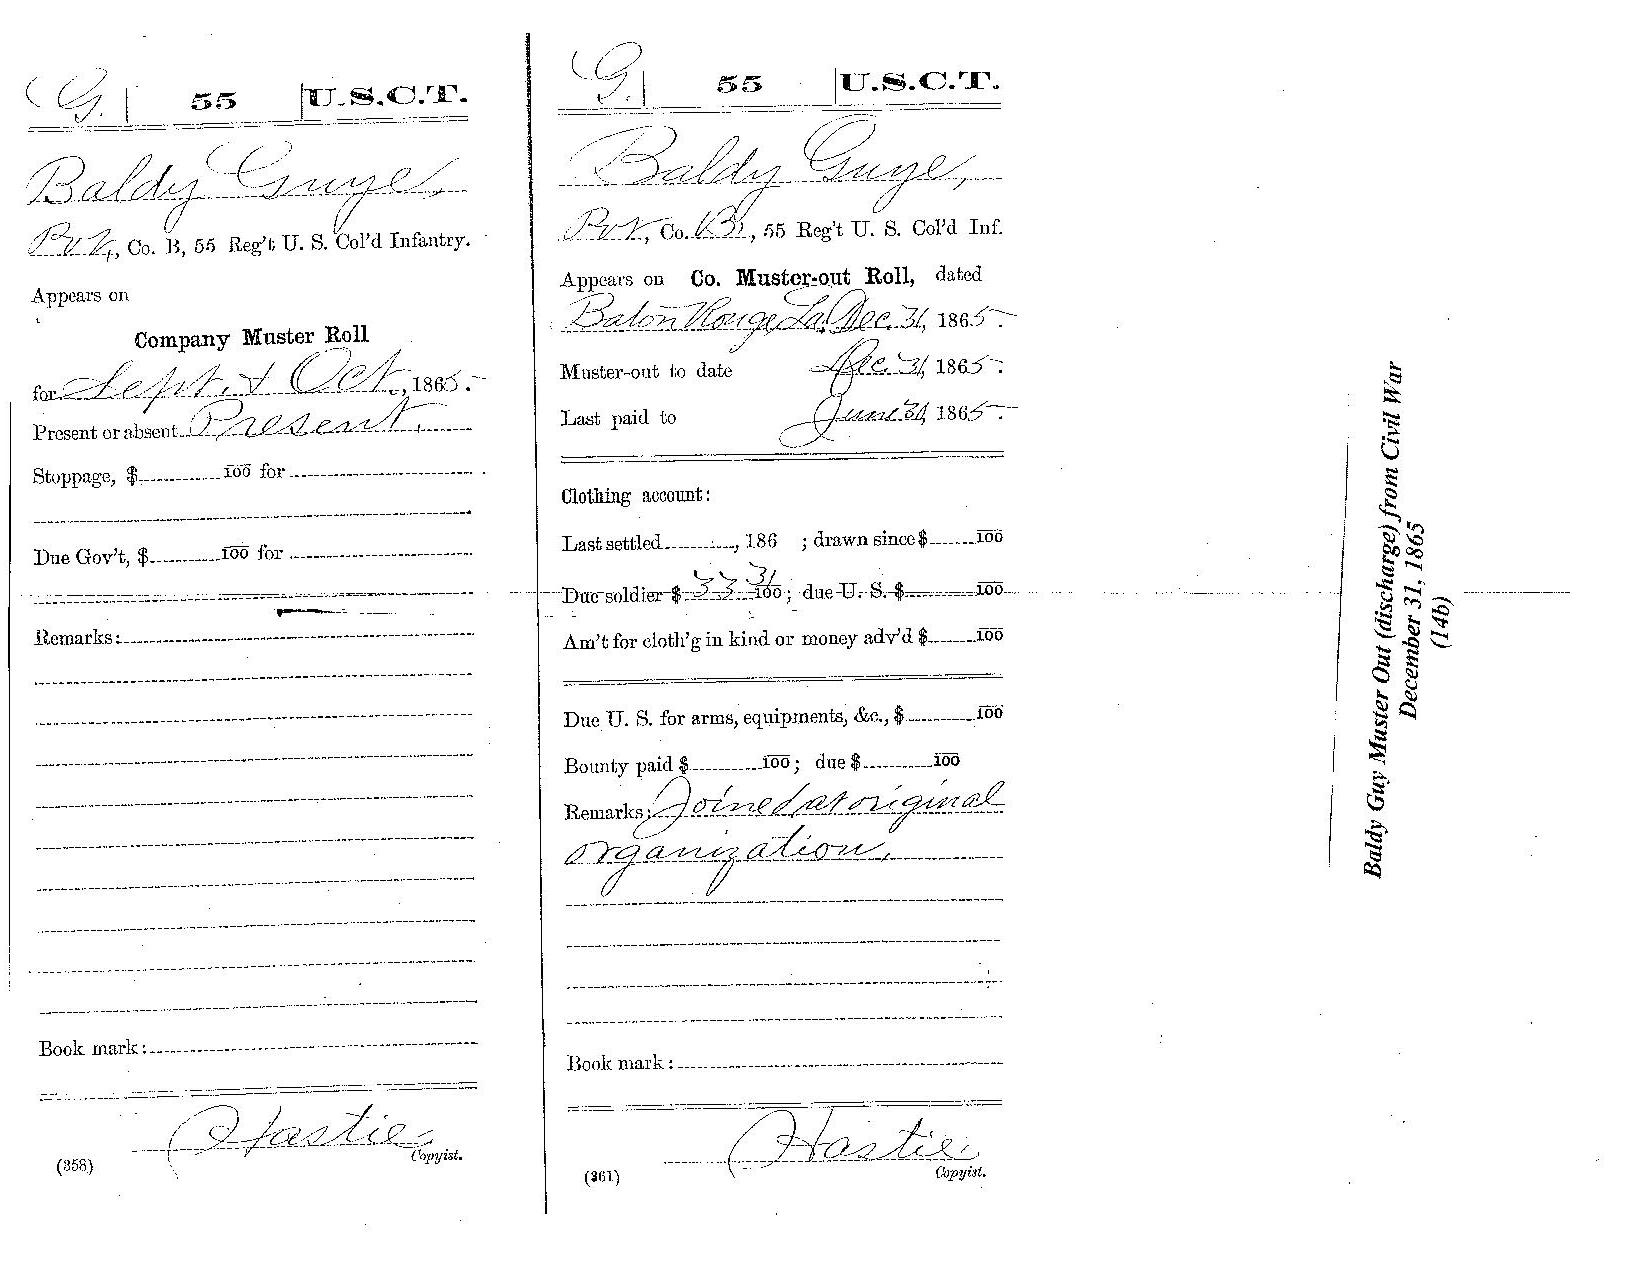 Baldy Guy's Muster Out (discharge) from Civil War December 31, 1865